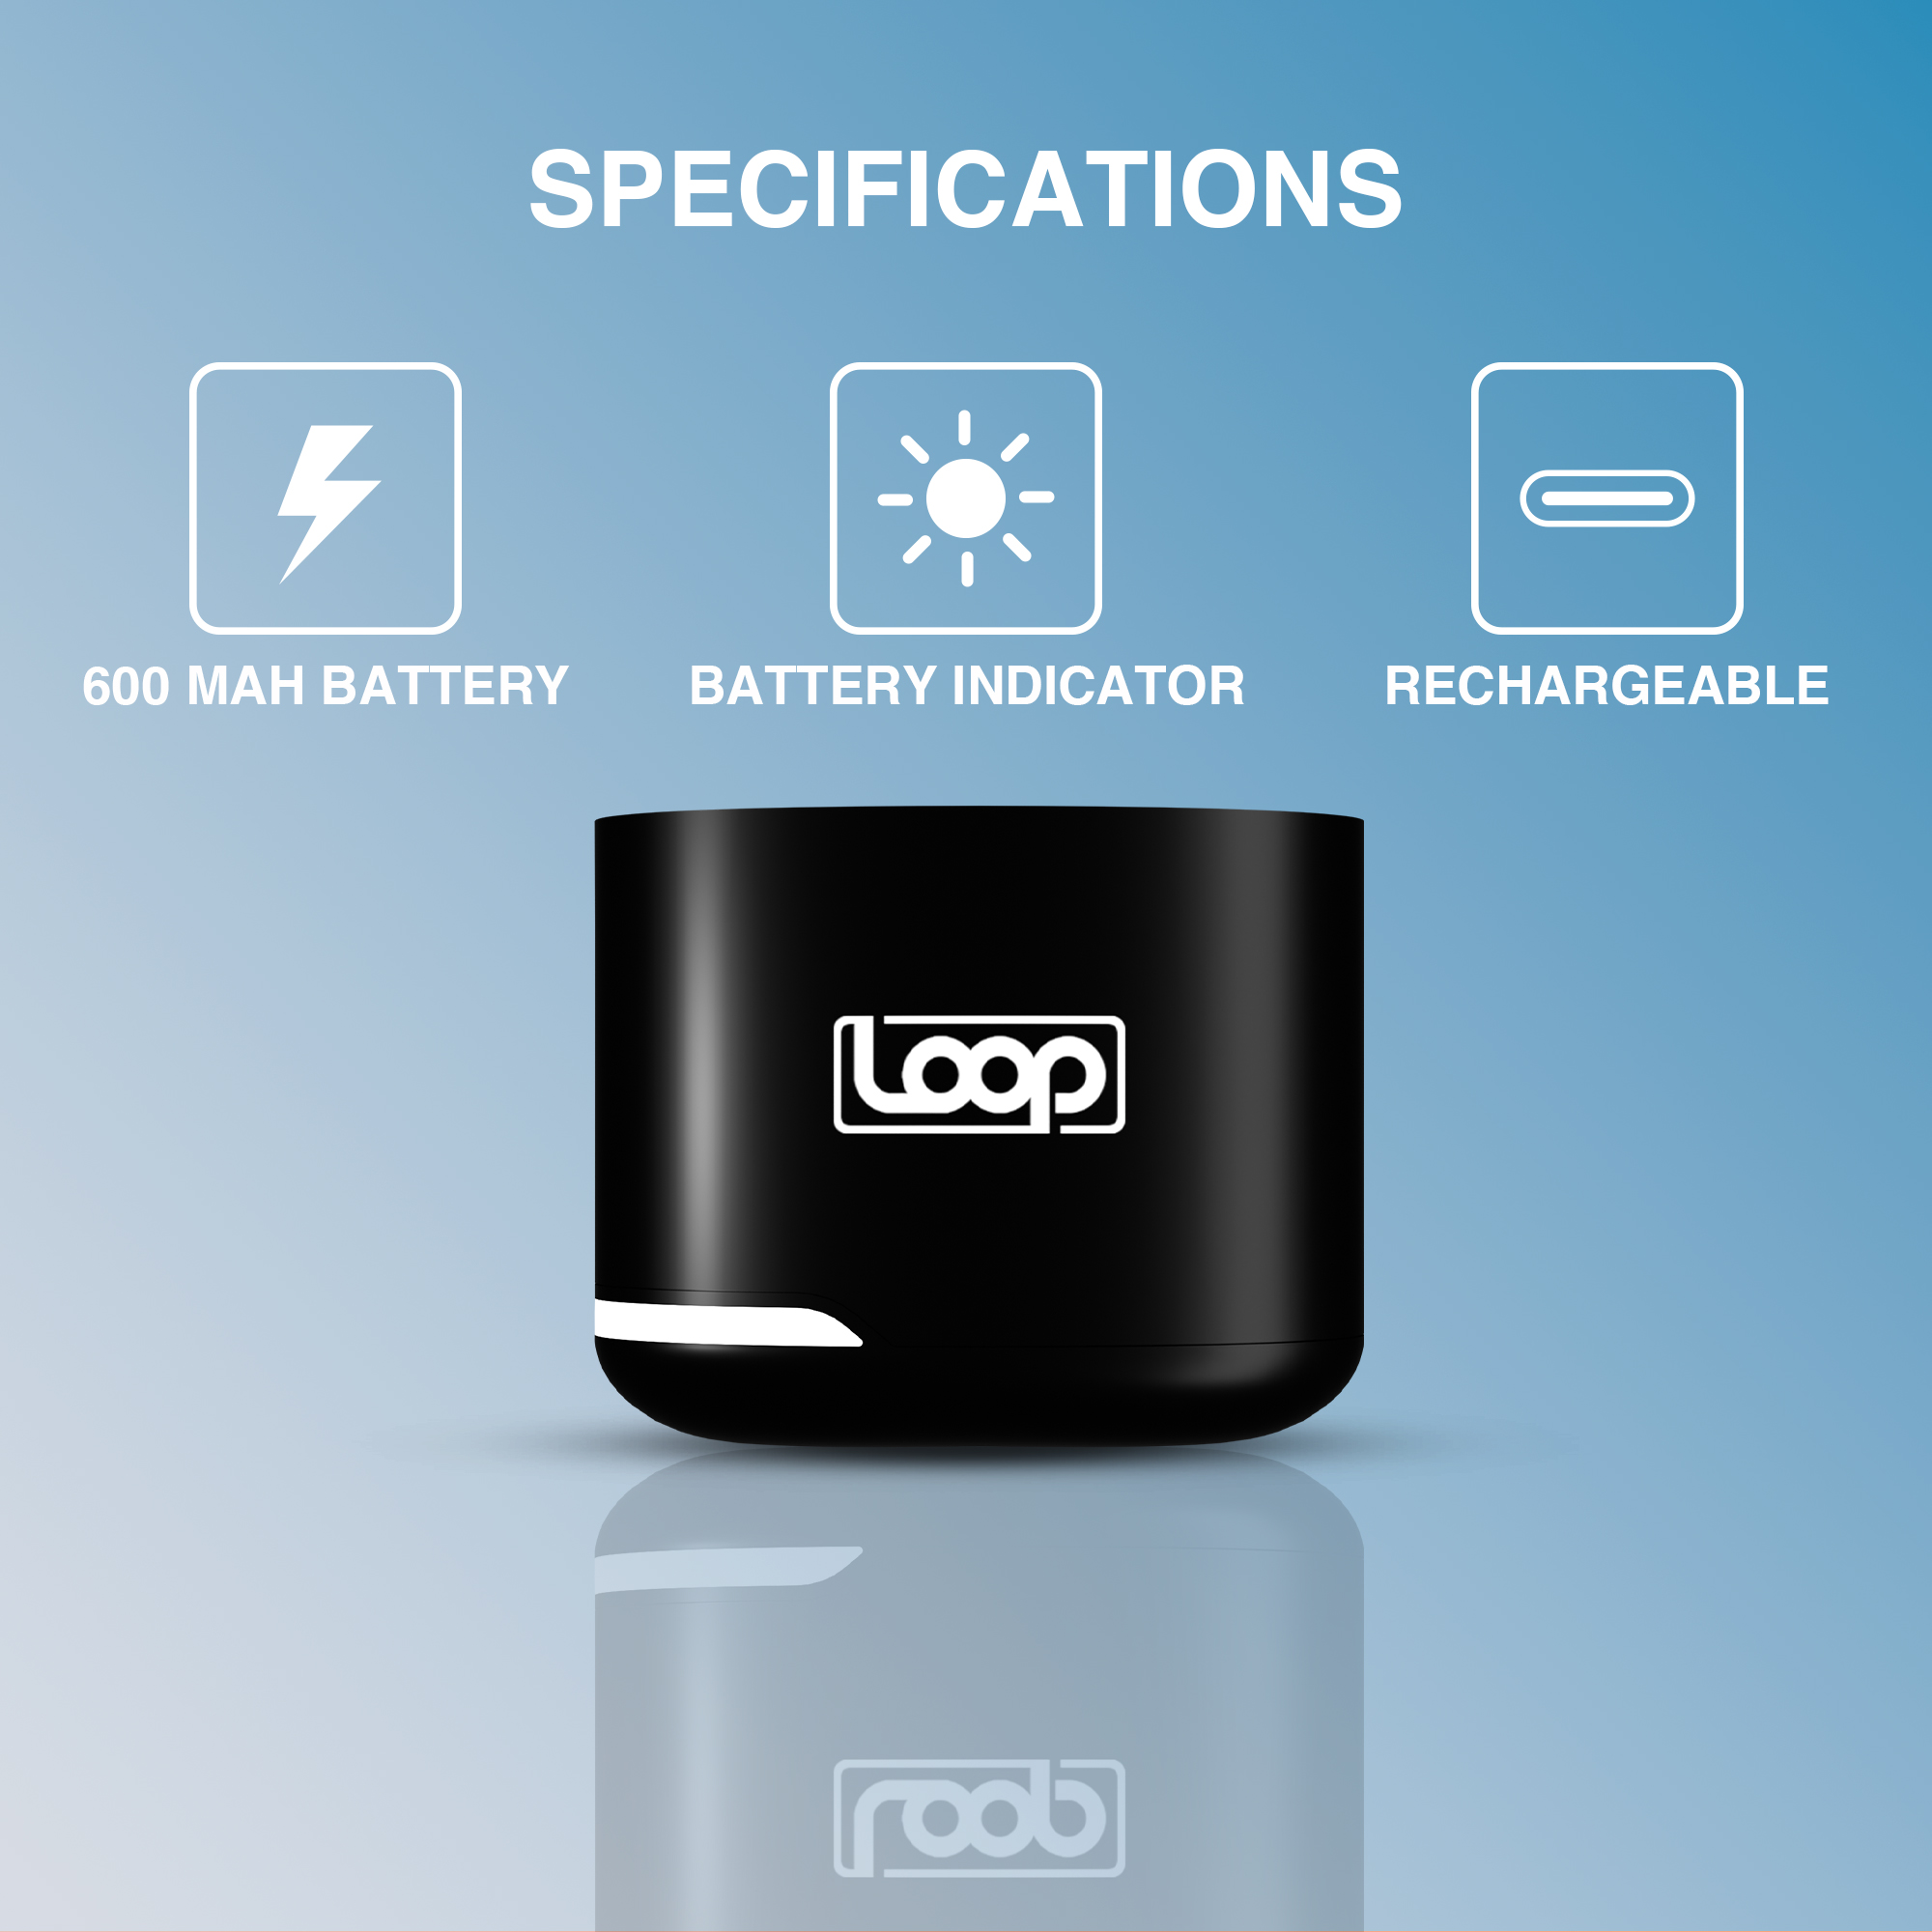 SPECIFICATIONS: 600 MAH BATTERY. BATTERY INDICATOR. RECHARGEABLE.